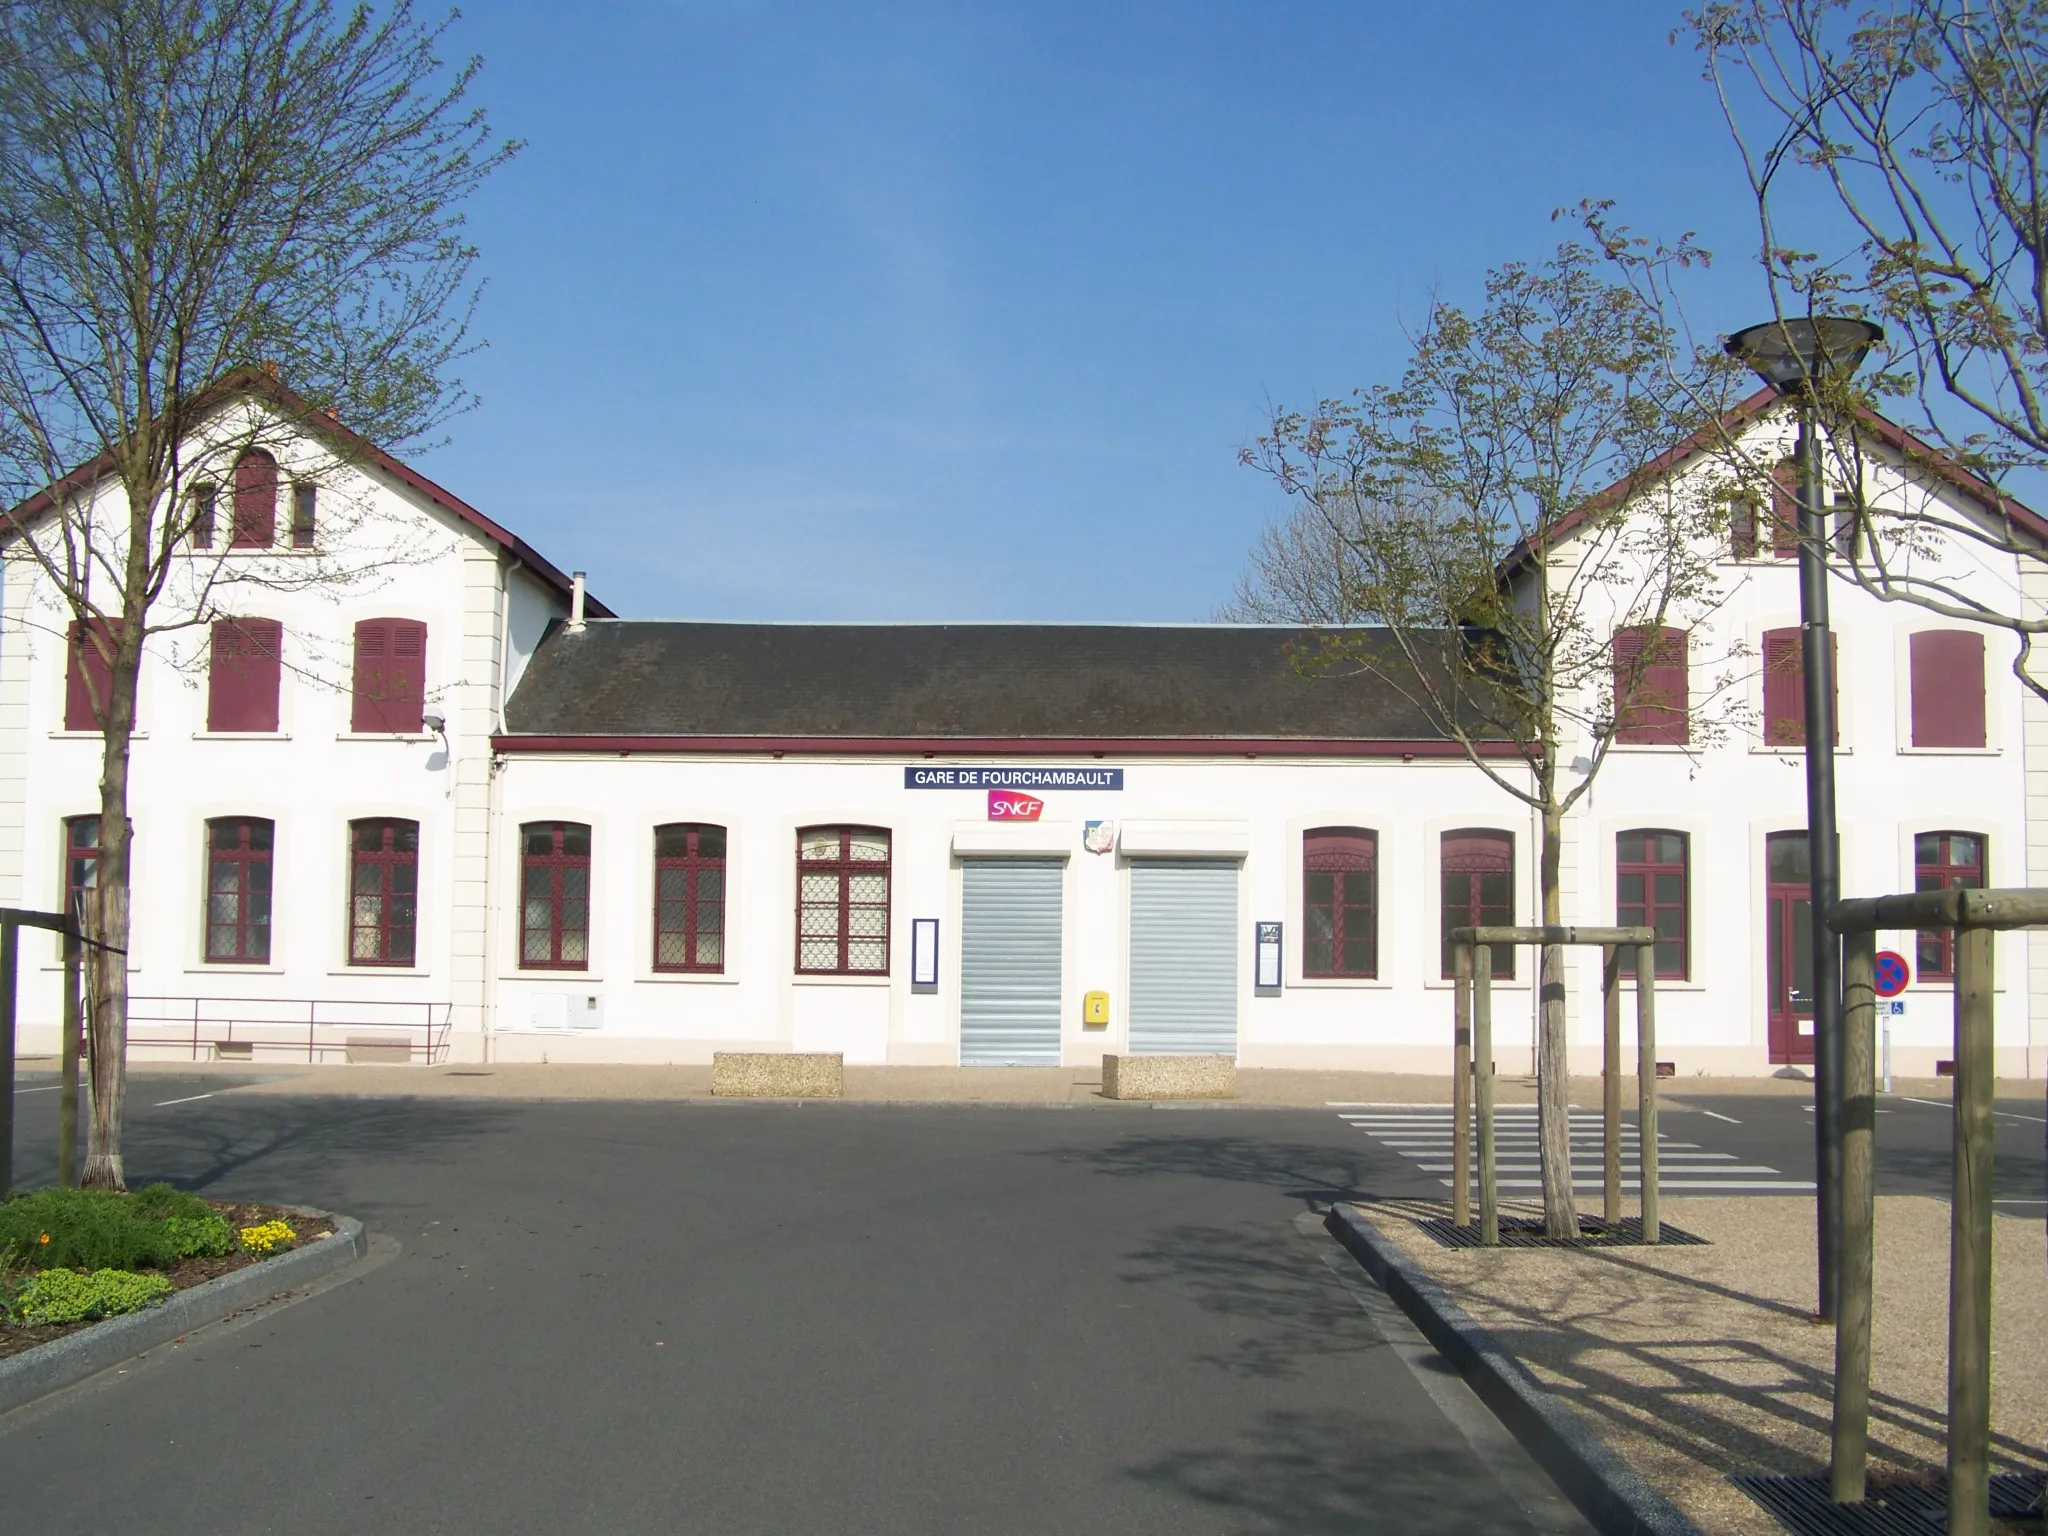 Photo showing: Building of Fourchambault railway station in Nièvre, France.